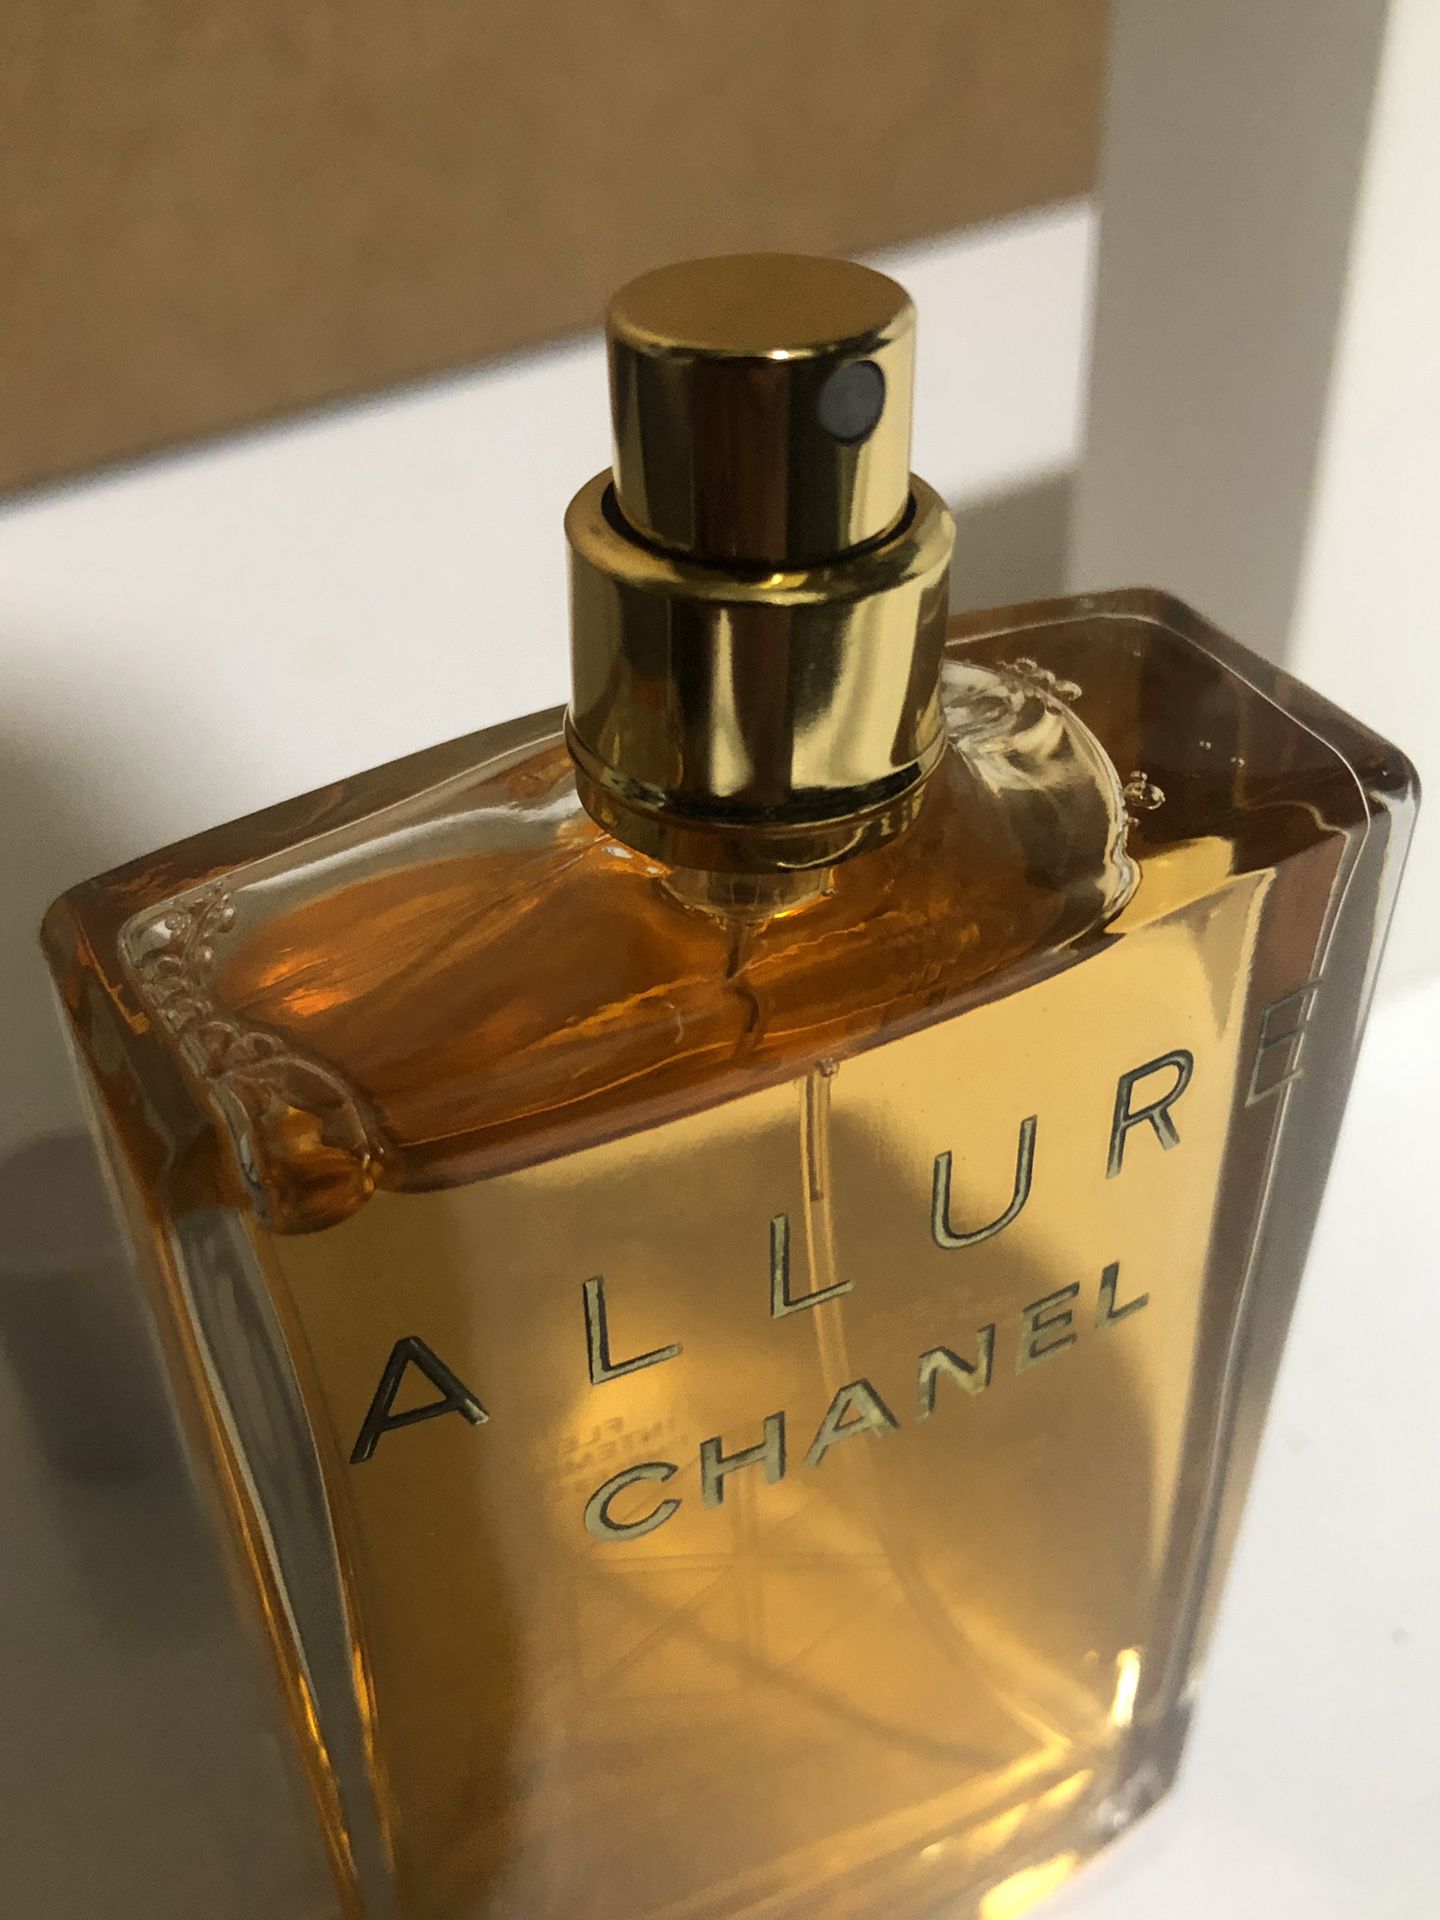 chanel allure homme edt 3.4